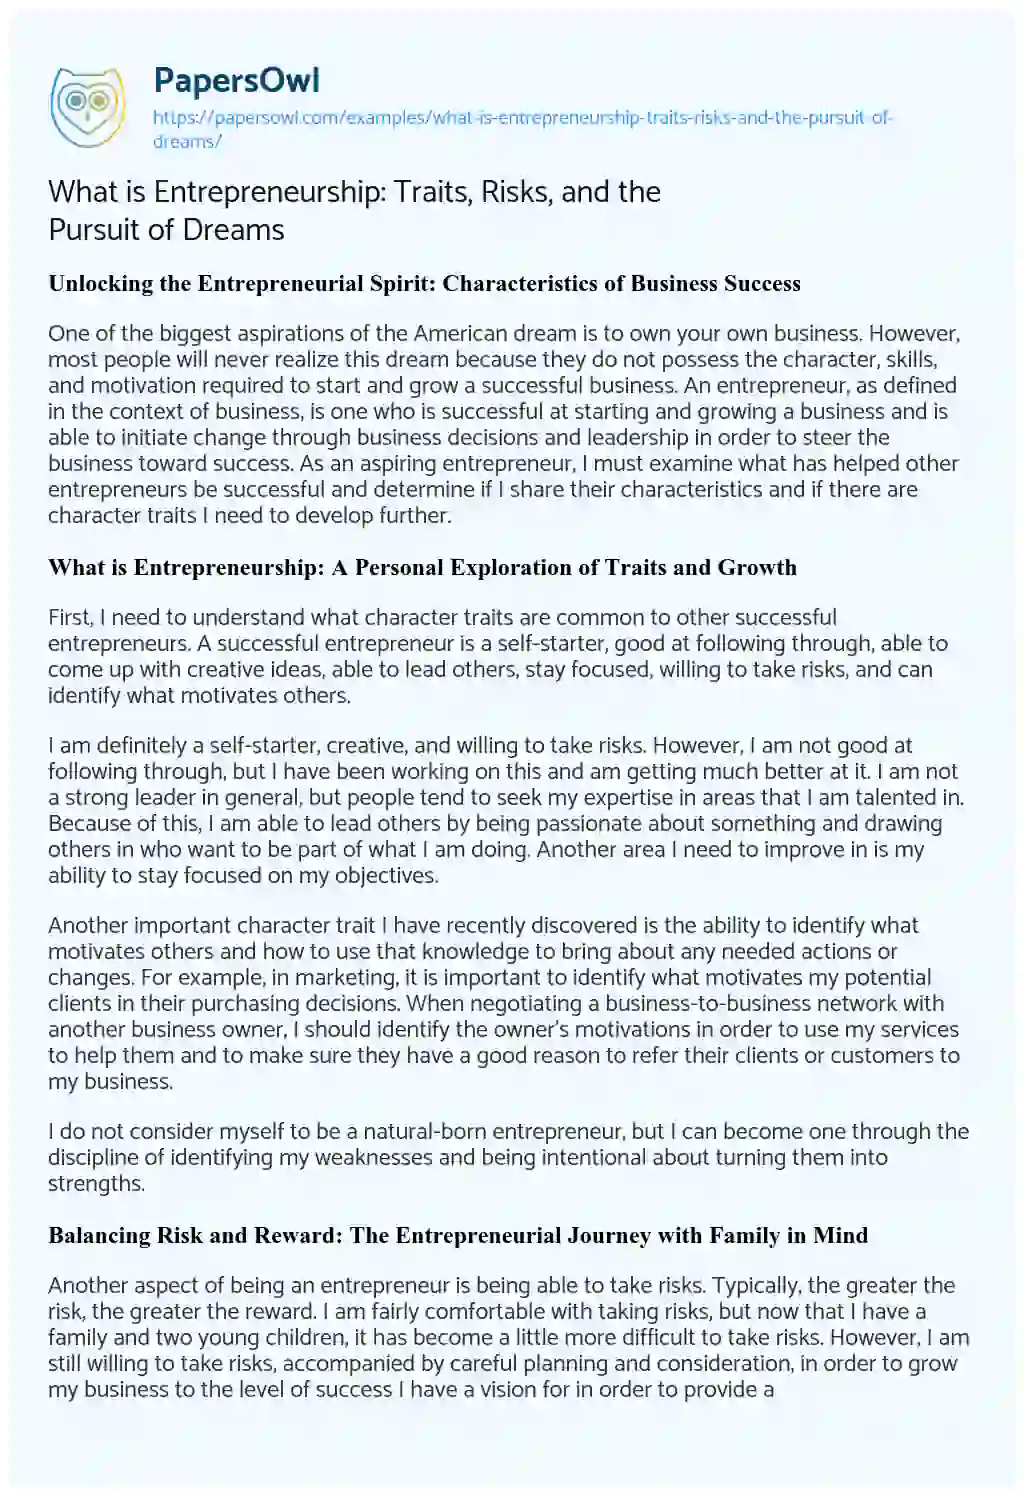 Essay on What is Entrepreneurship: Traits, Risks, and the Pursuit of Dreams